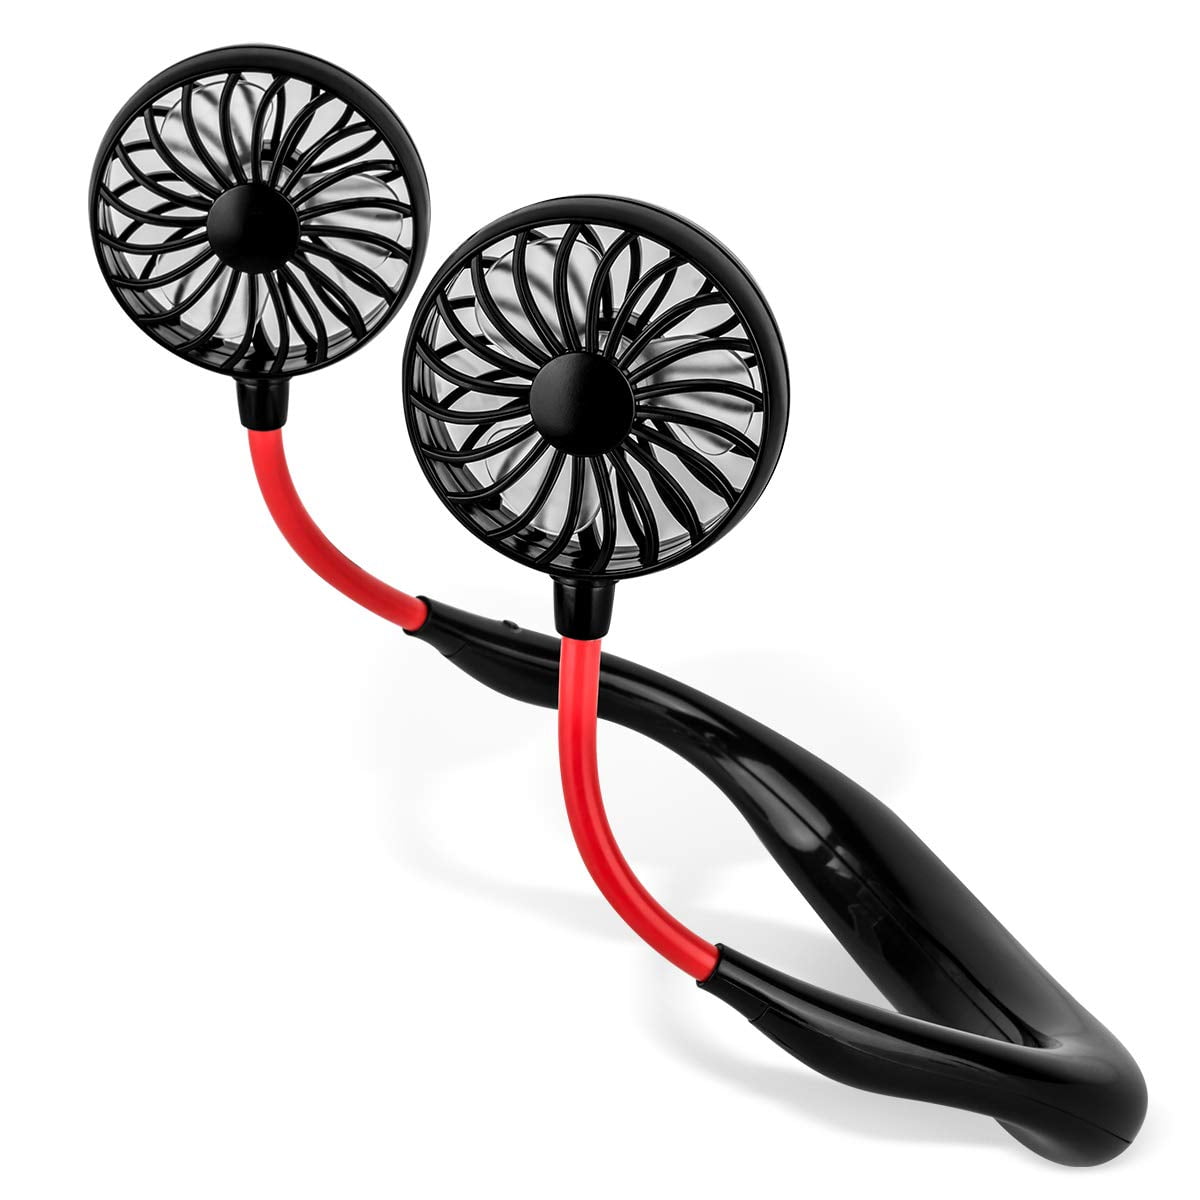 Tagital Portable Hands-free Neck Fan with 3 Speed Control and 360